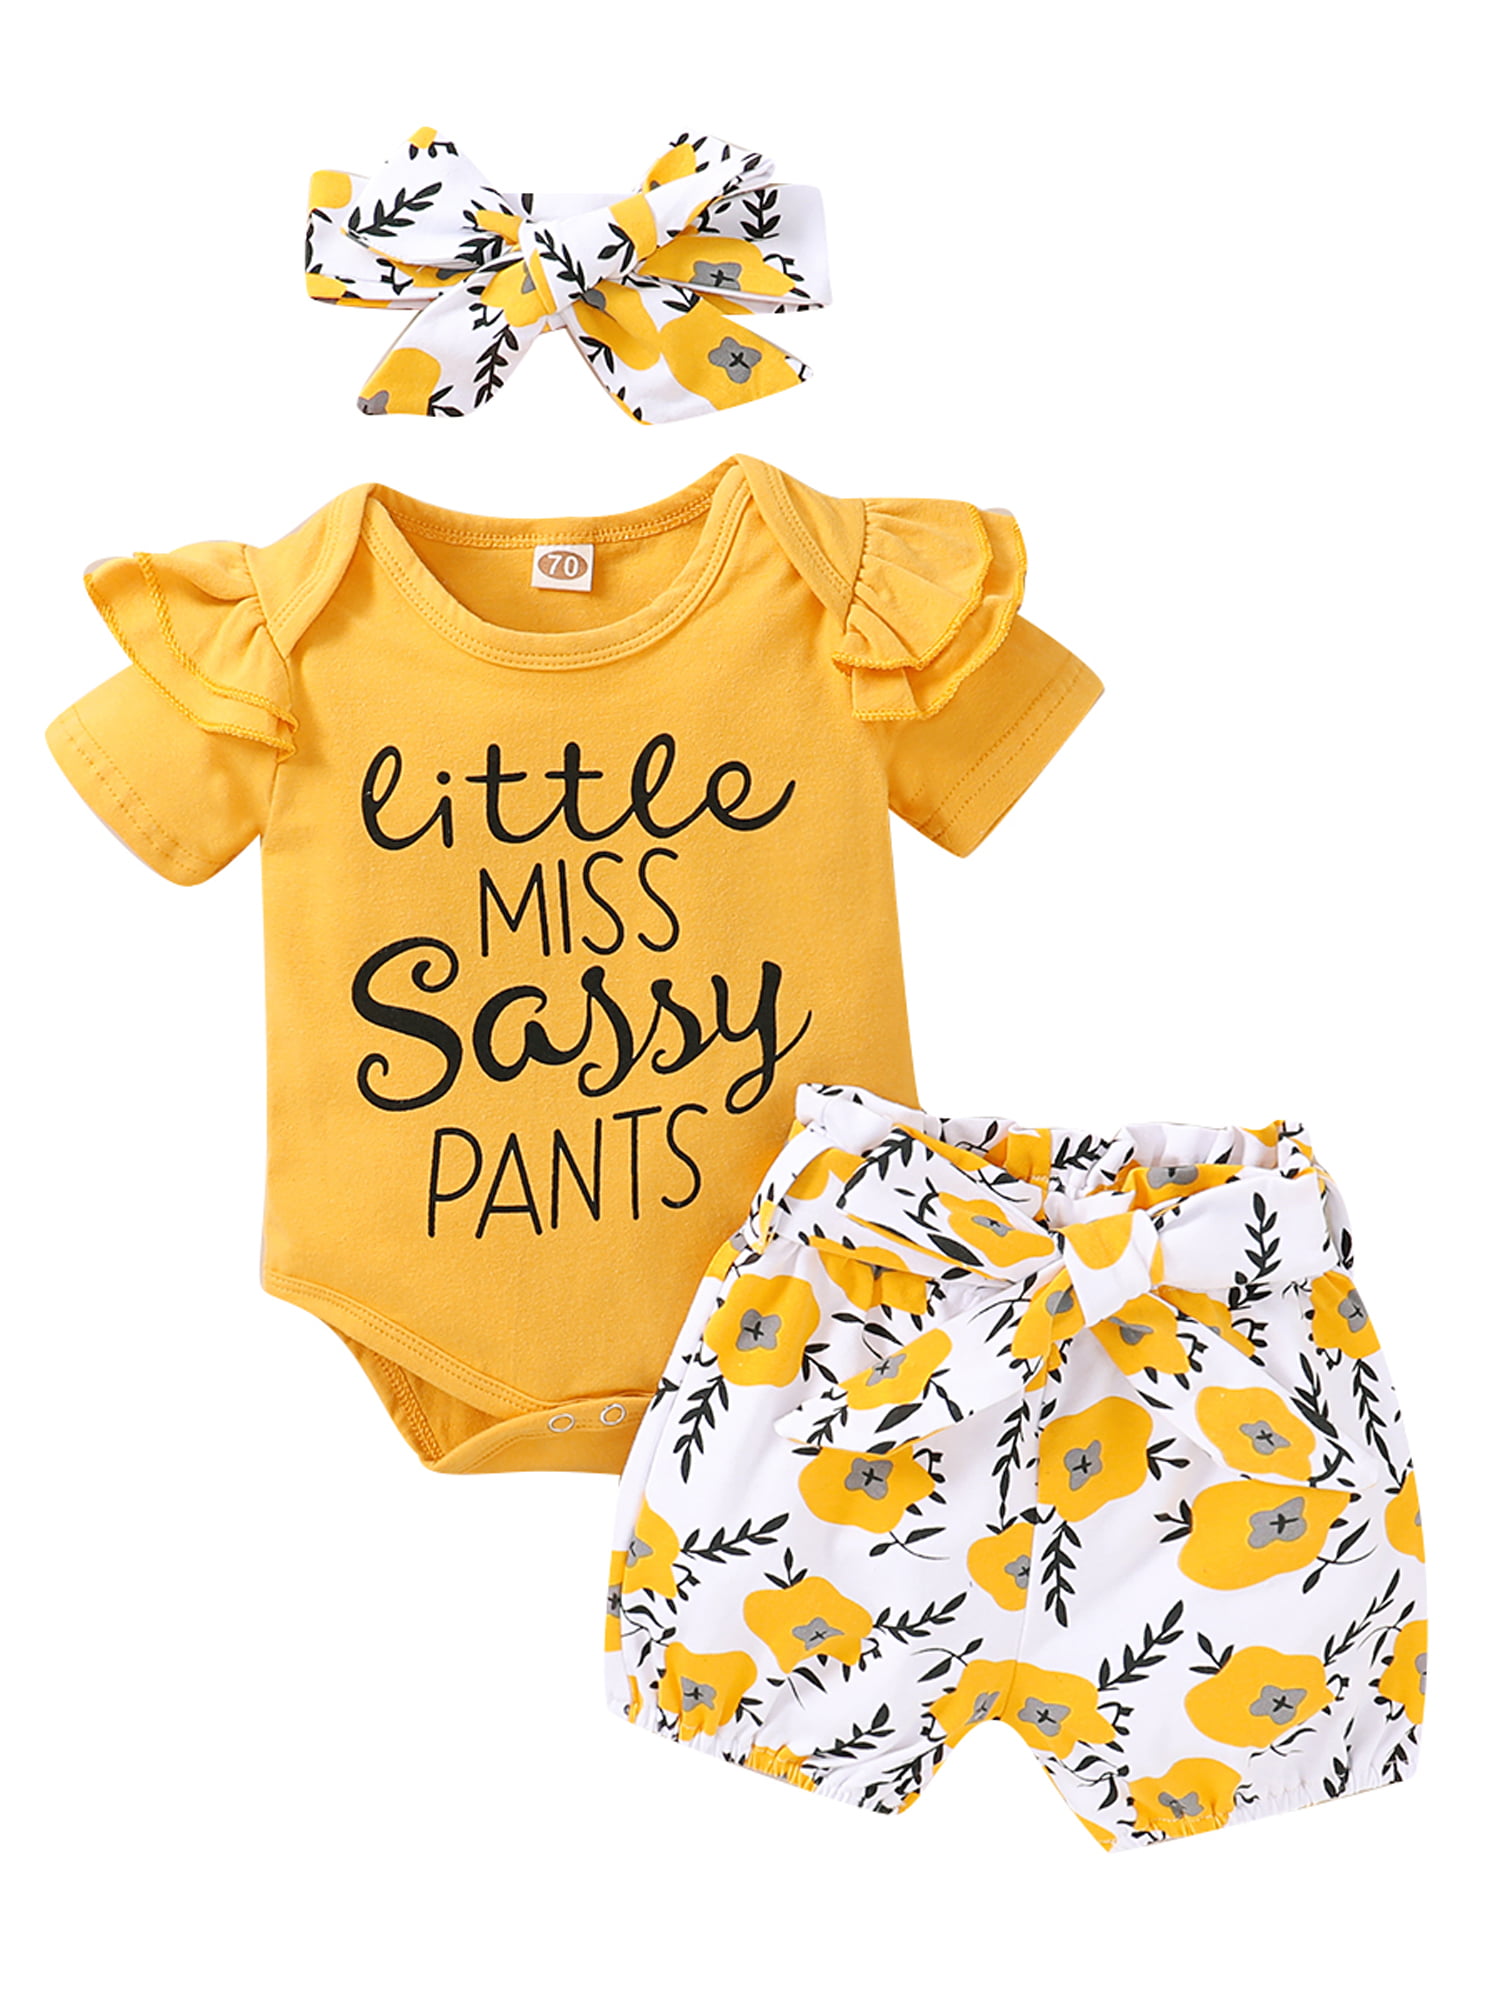 Details about   Infant Baby Girls Printing Romper Bodysuit+Sunflower Shorts+Headband Outfits 